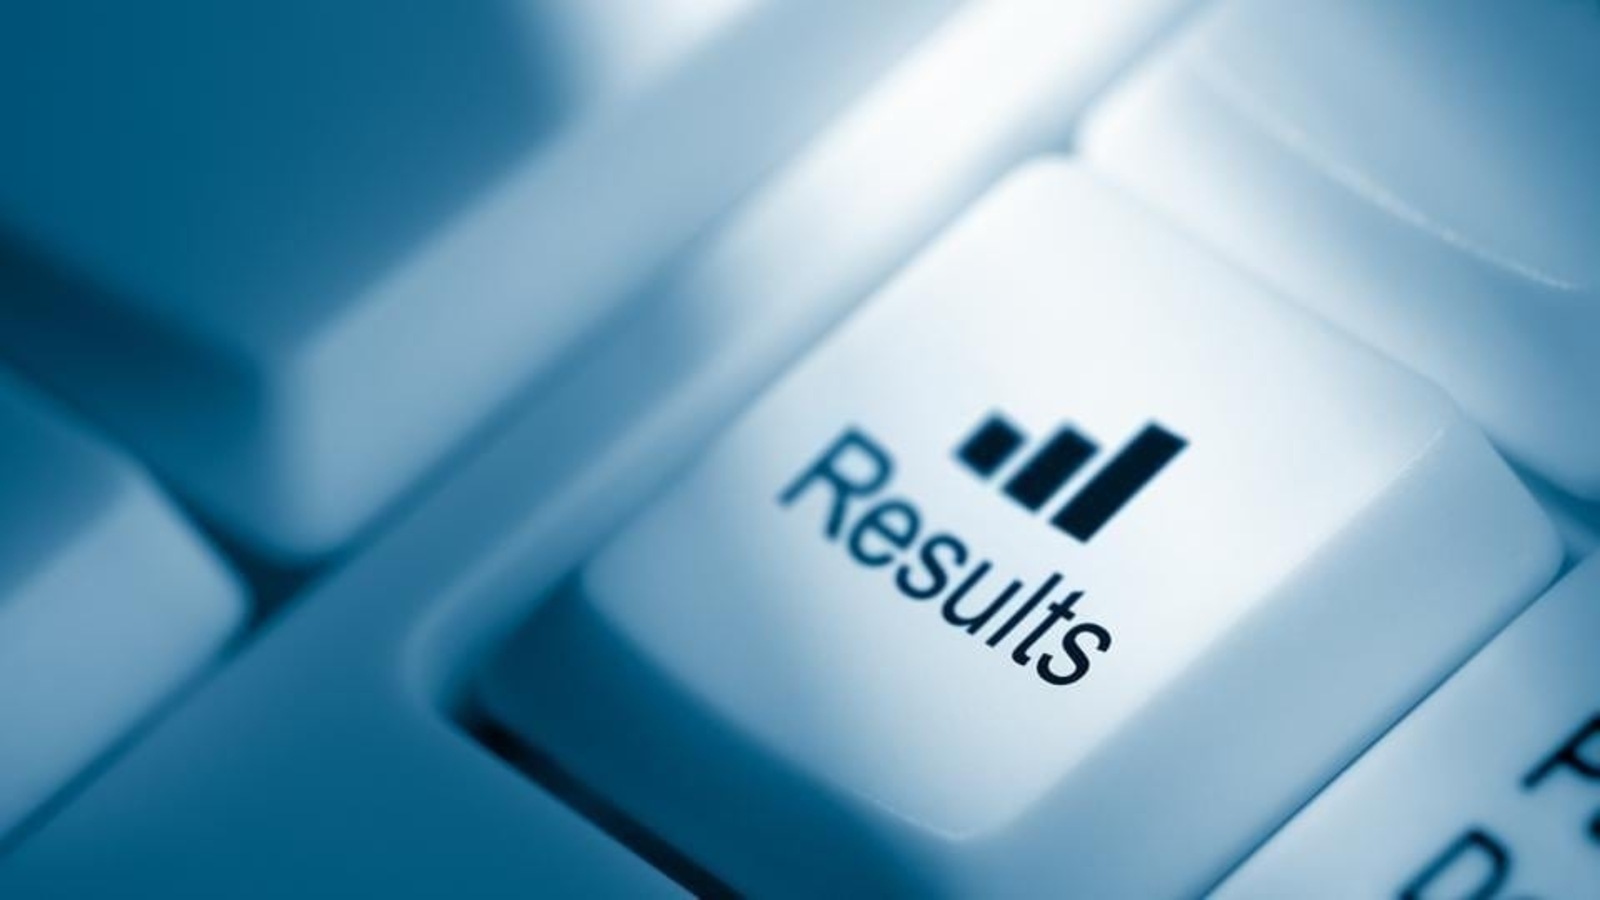 HP TET results 2021 declared, here's the direct link to check